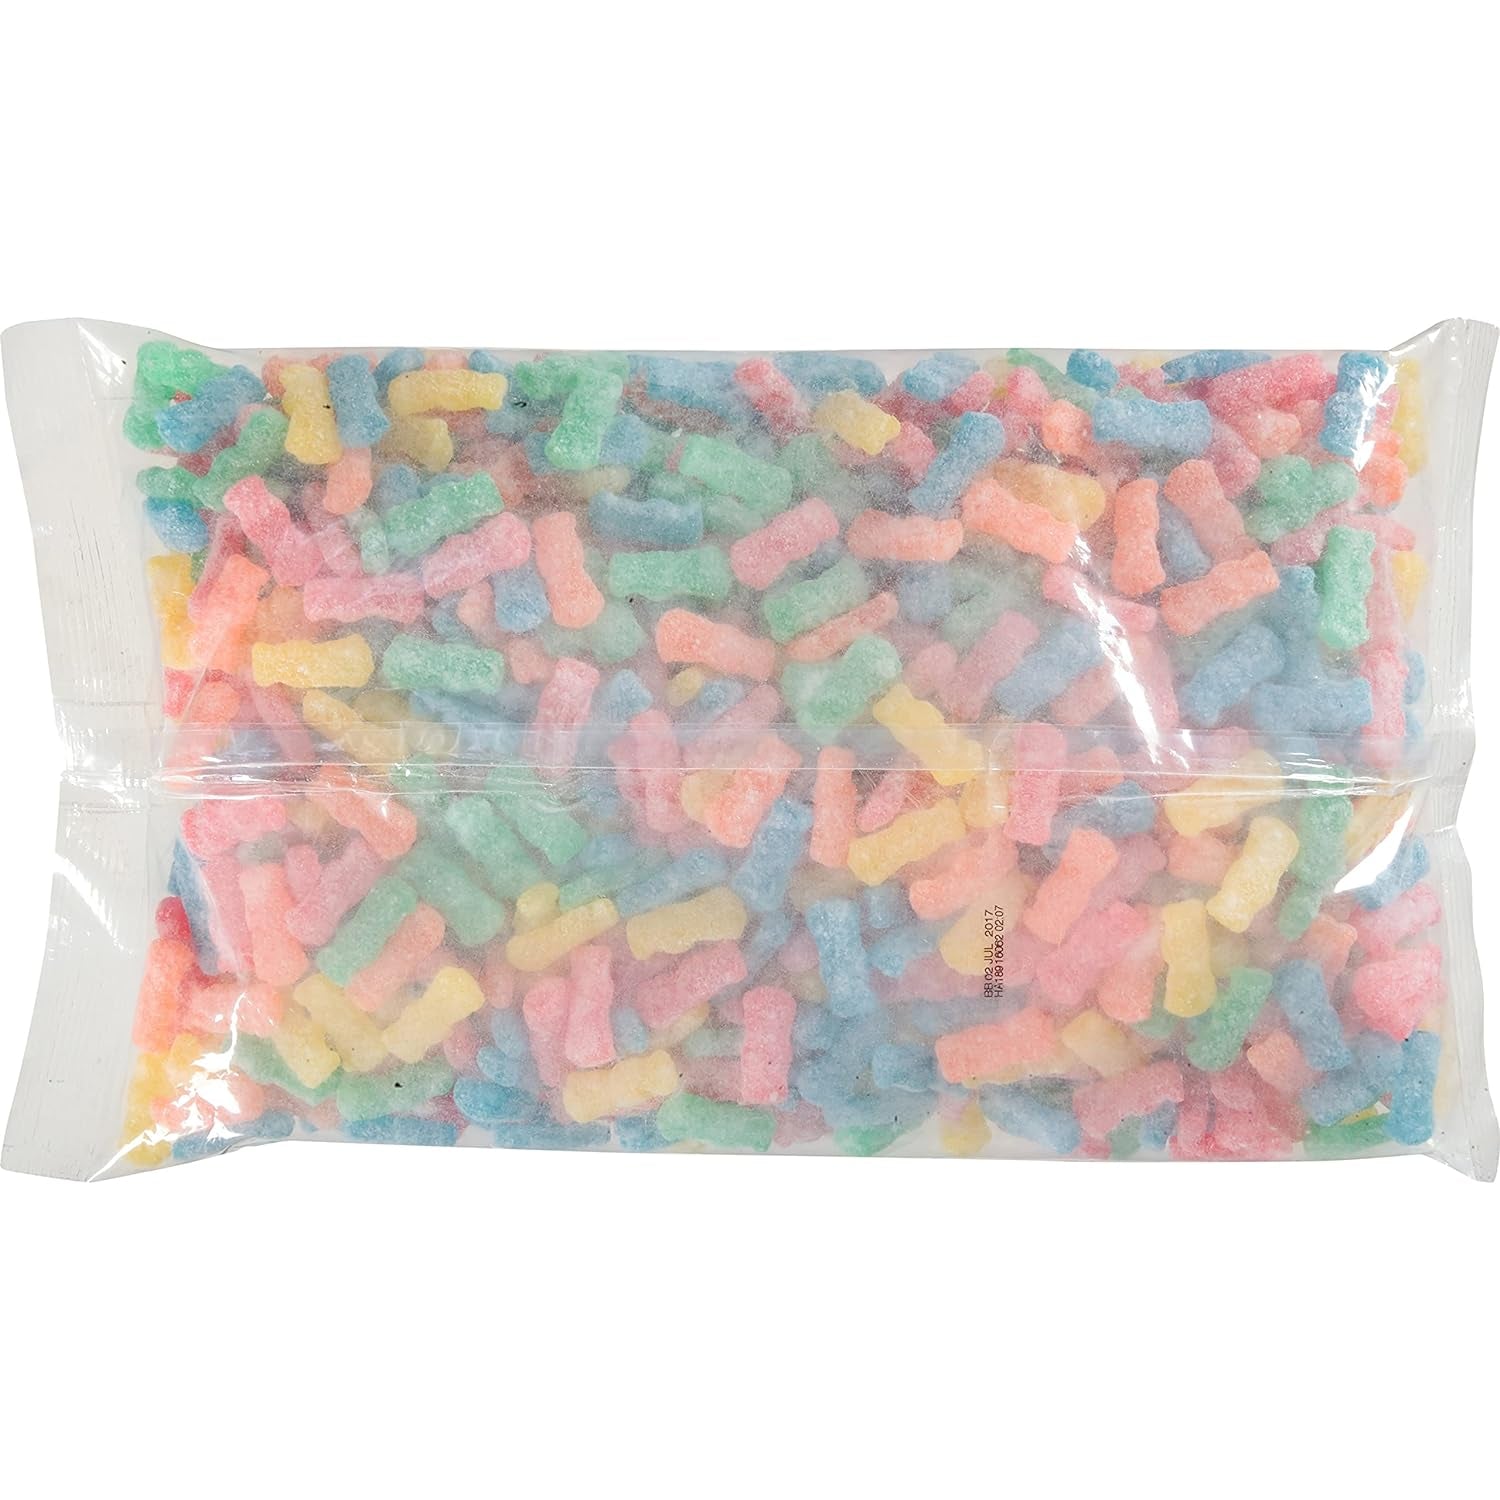 Soft & Chewy Candy, 5 Lb Bag